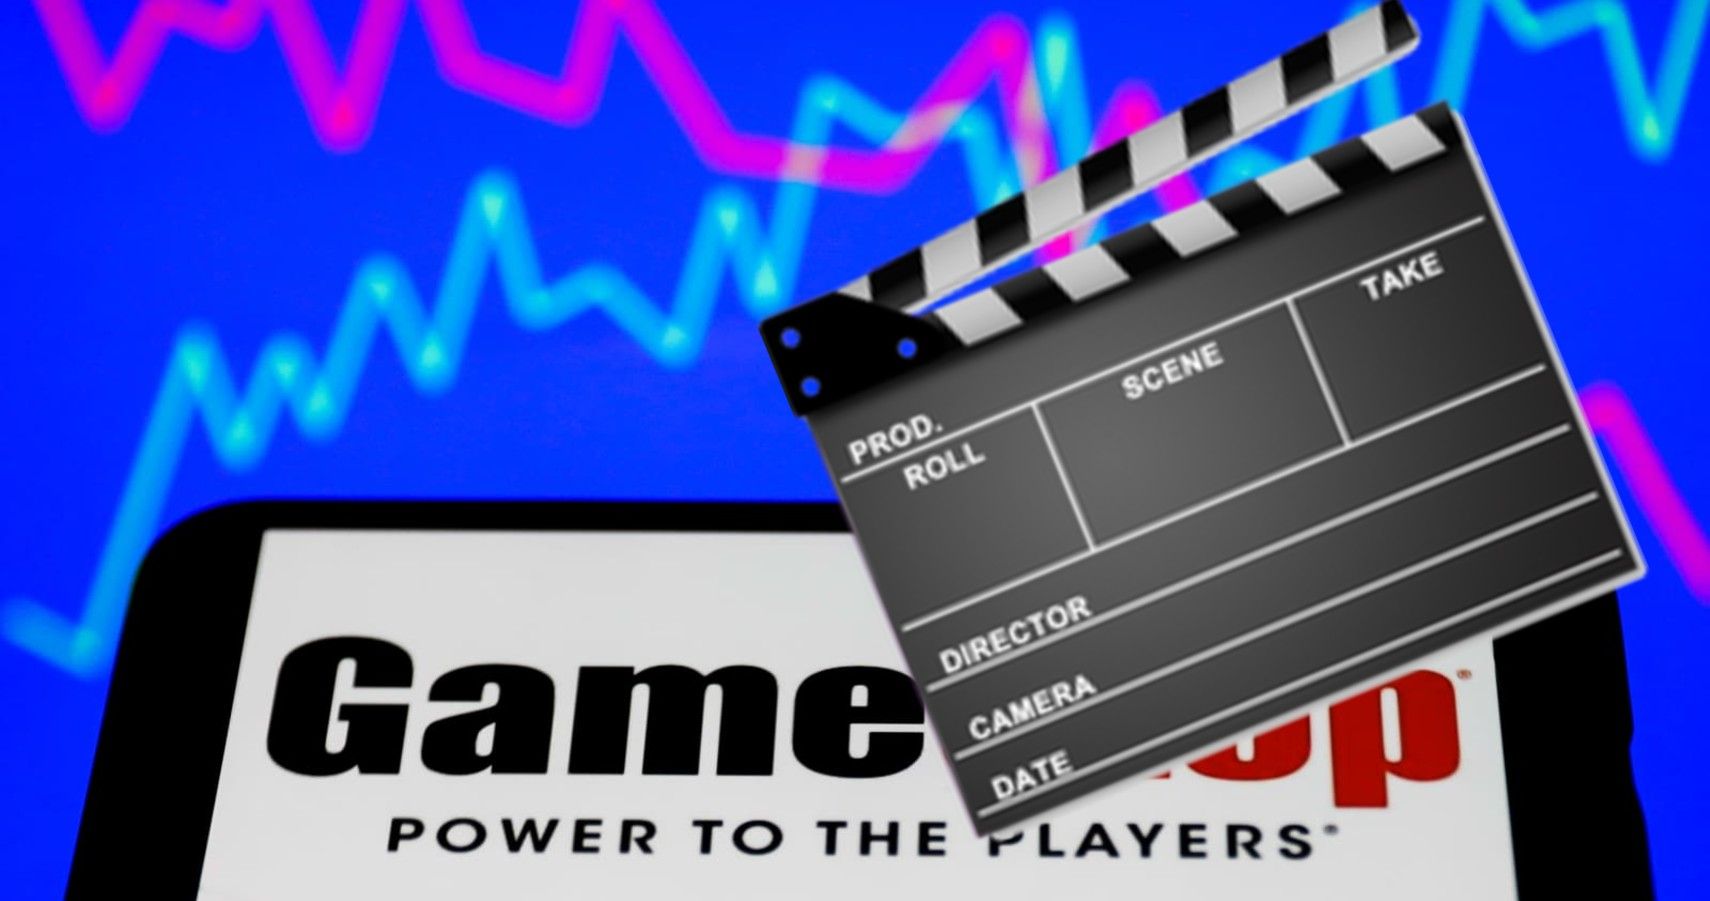 The GameStop Vs Wall Street Battle Is Getting A Hollywood Movie Adaptation